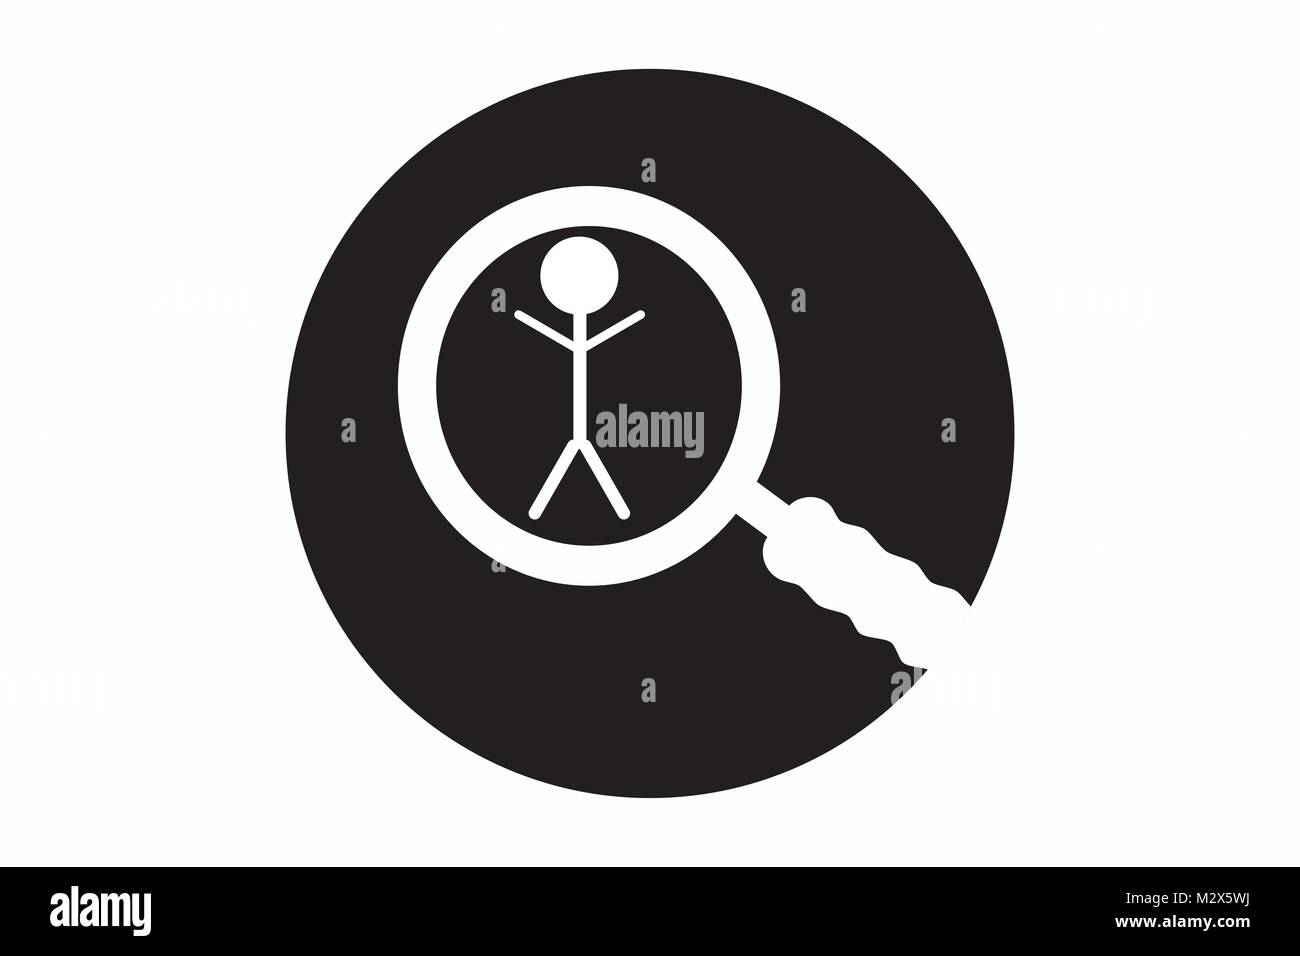 View profile icon, visit profile symbol, find friends icon, search somebody icon, illustration of stickman viewed under magnifying glass/ magnifier Stock Vector